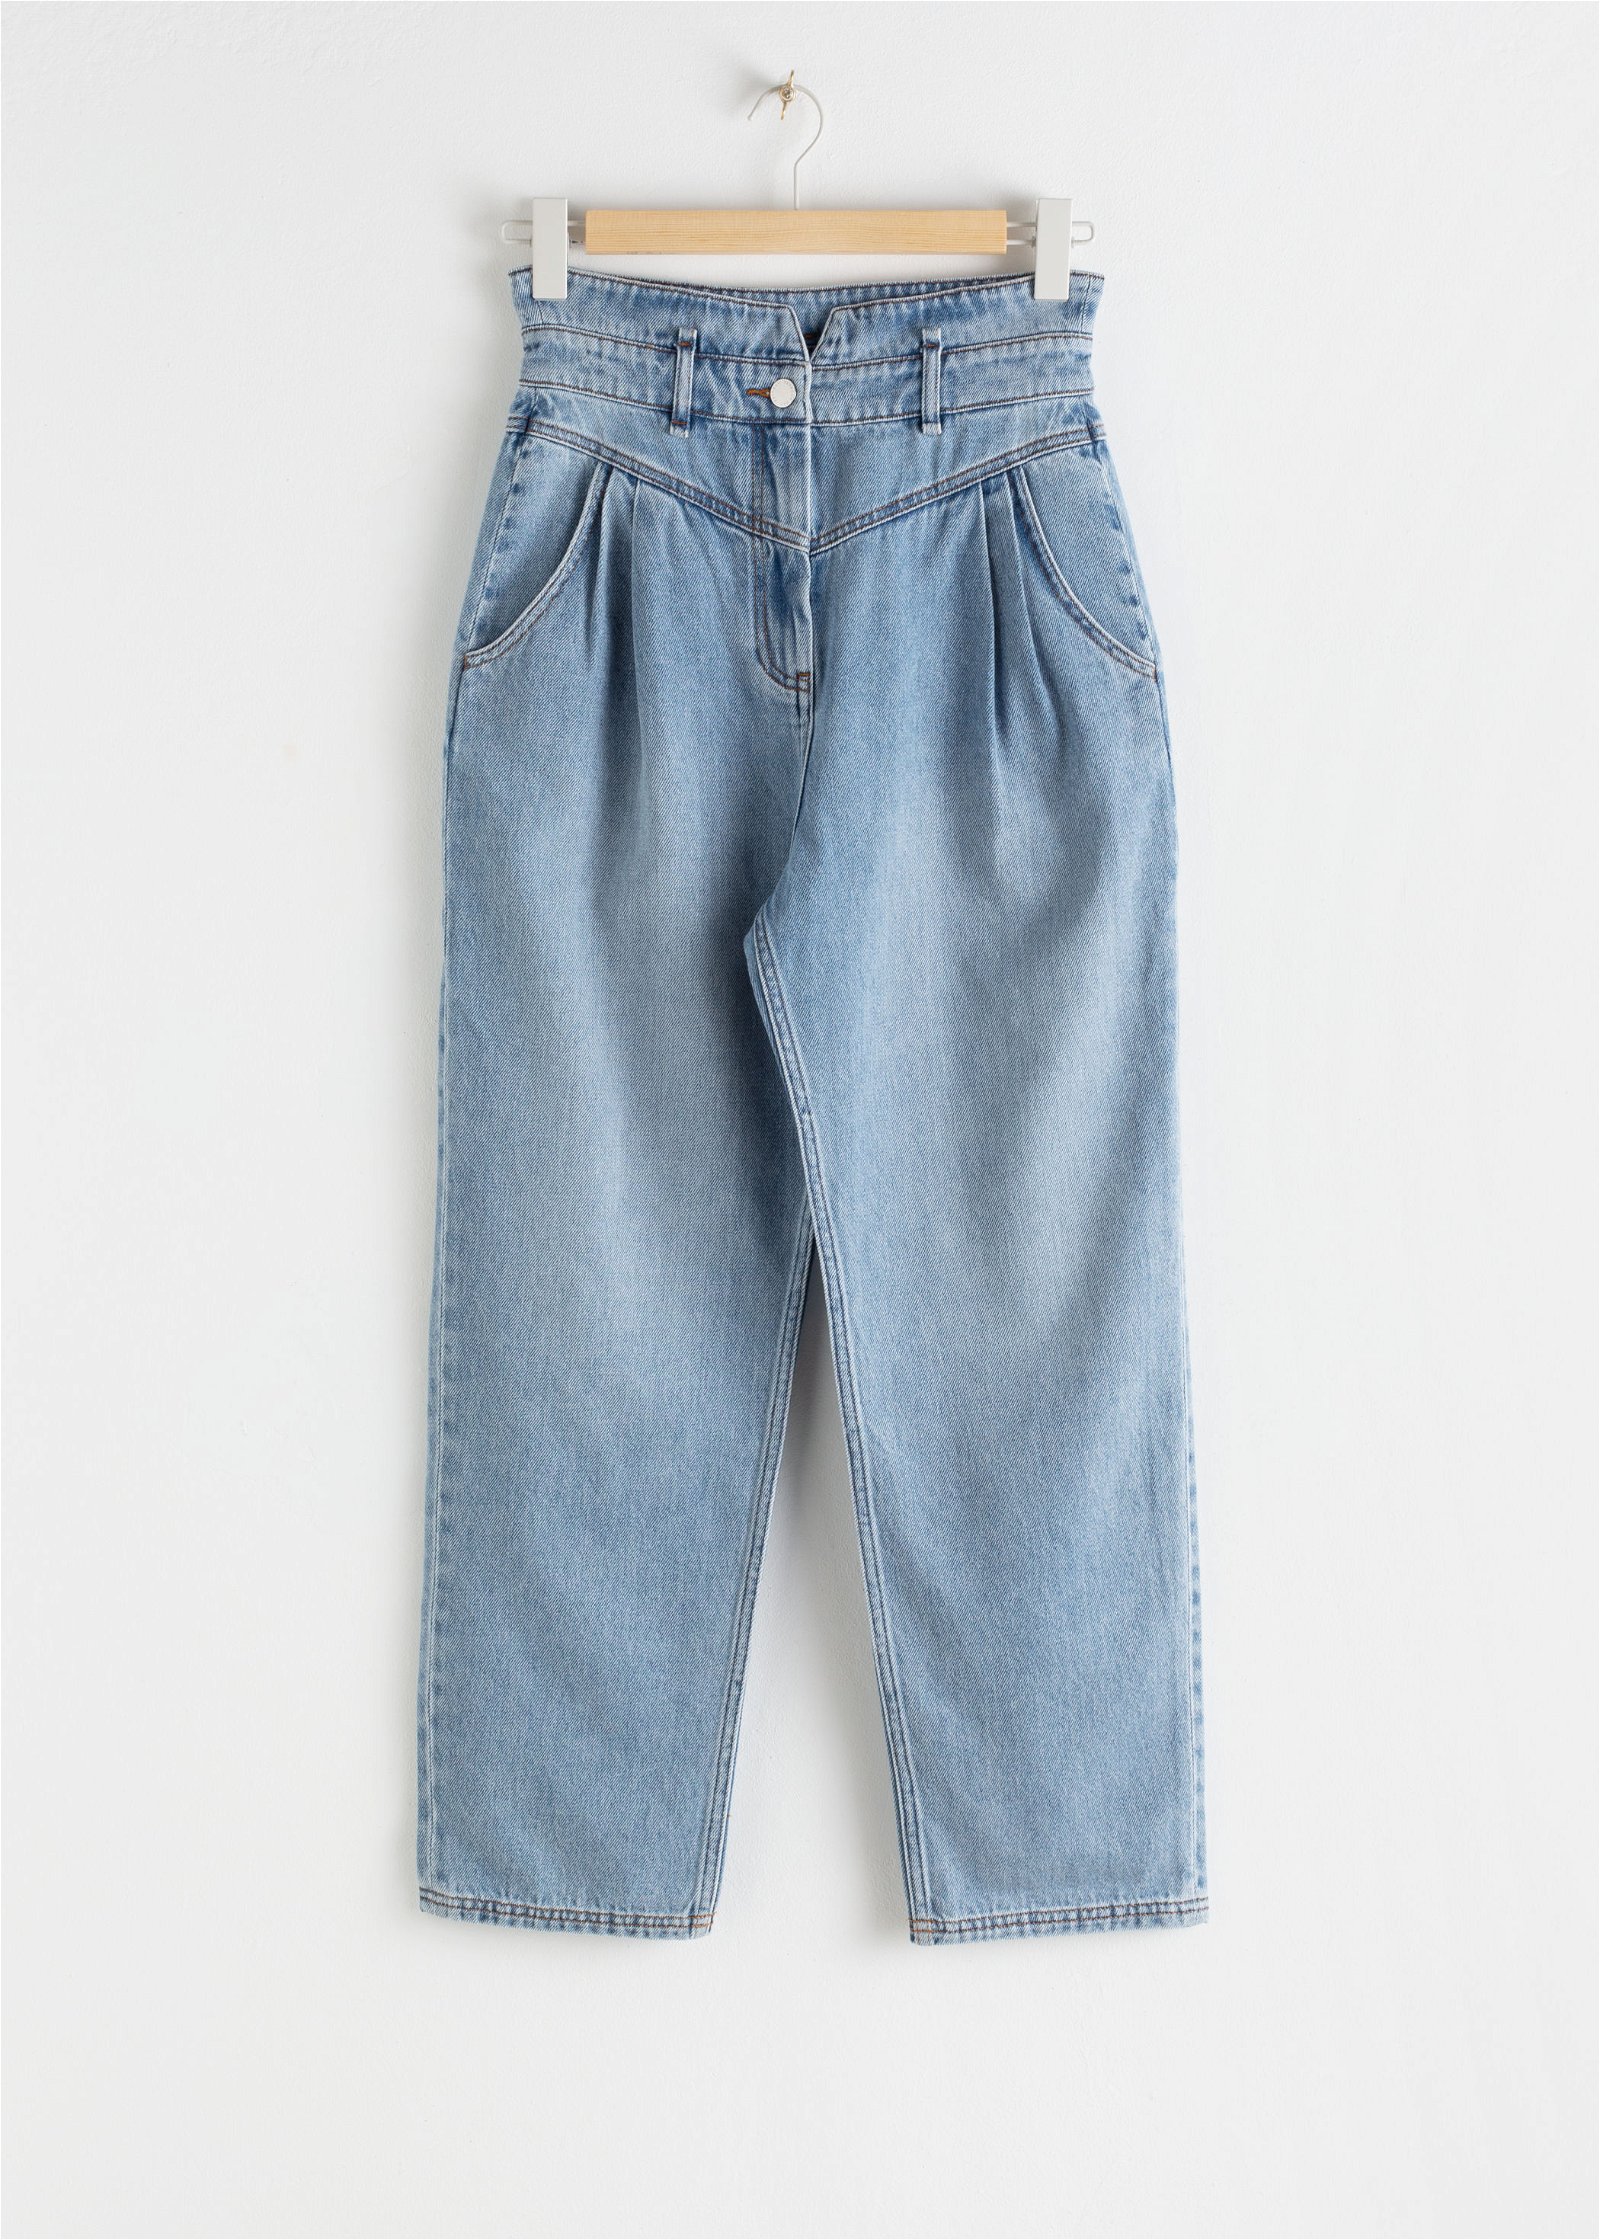 amp; Other Stories + Belted Paperbag Waist Jeans